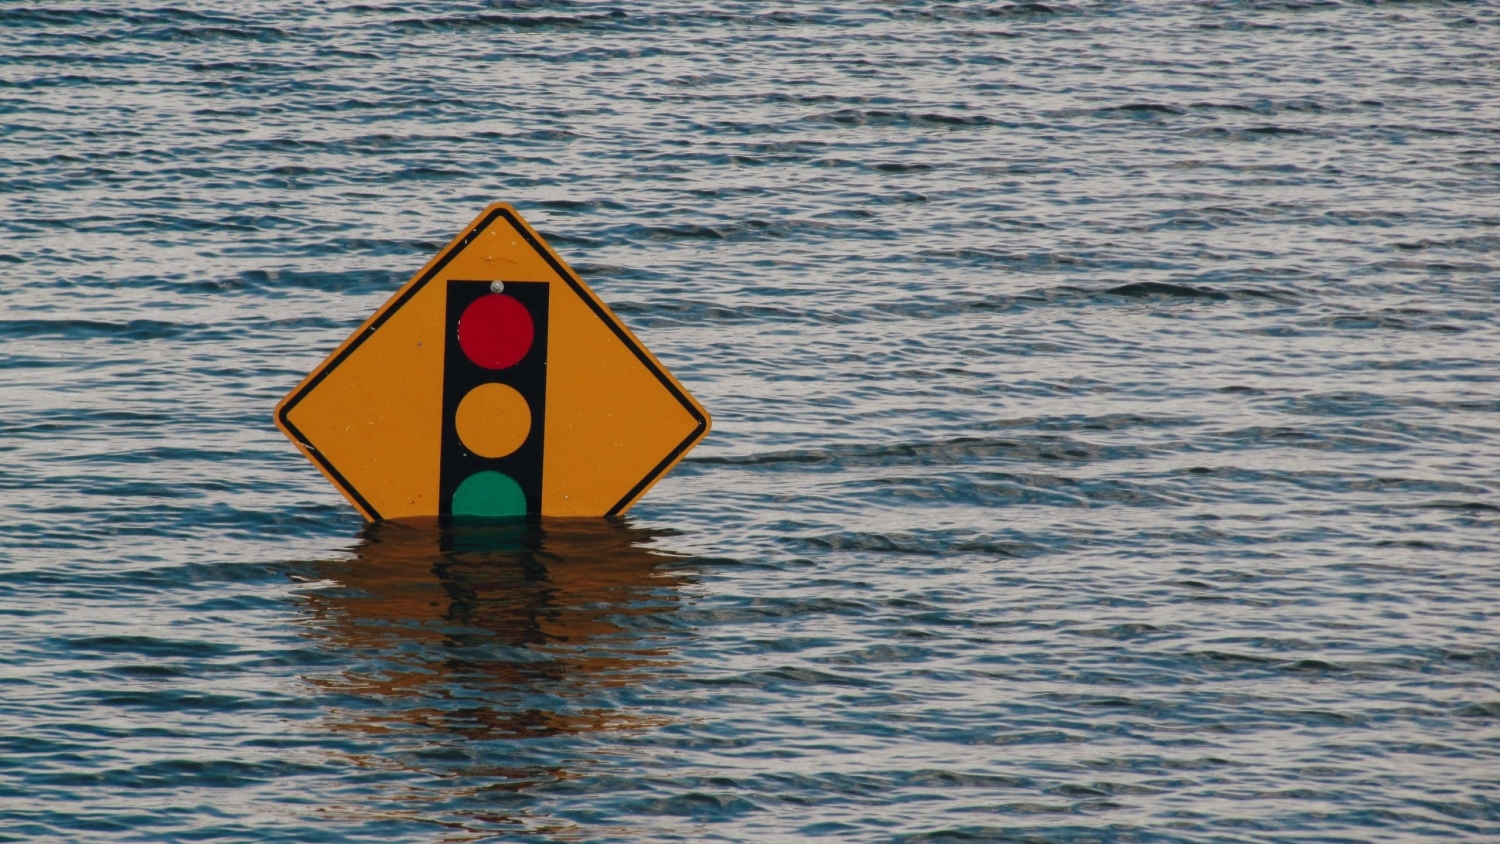 Traffic light sign - Gaps Found in Research on ‘Climate Gentrification’ - College of Natural Resources News NC State University